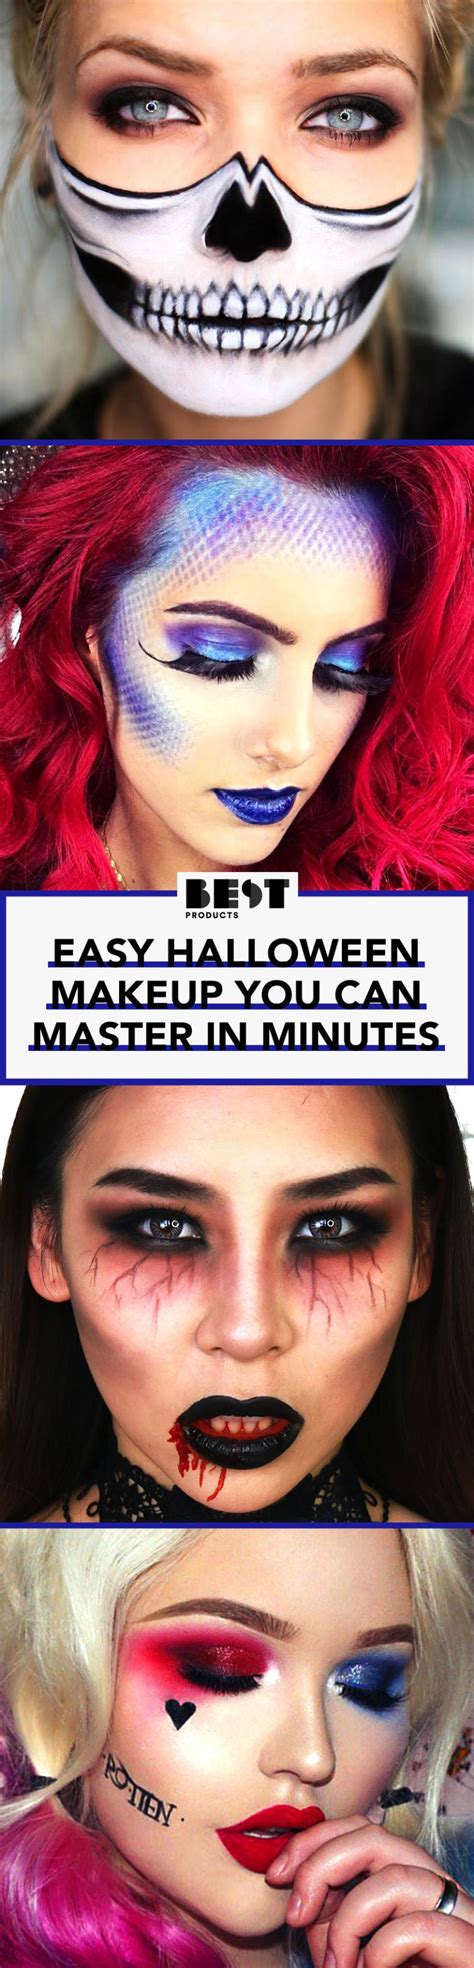 Easy Halloween Makeup Ideas You Can Master In Minutes Halloween